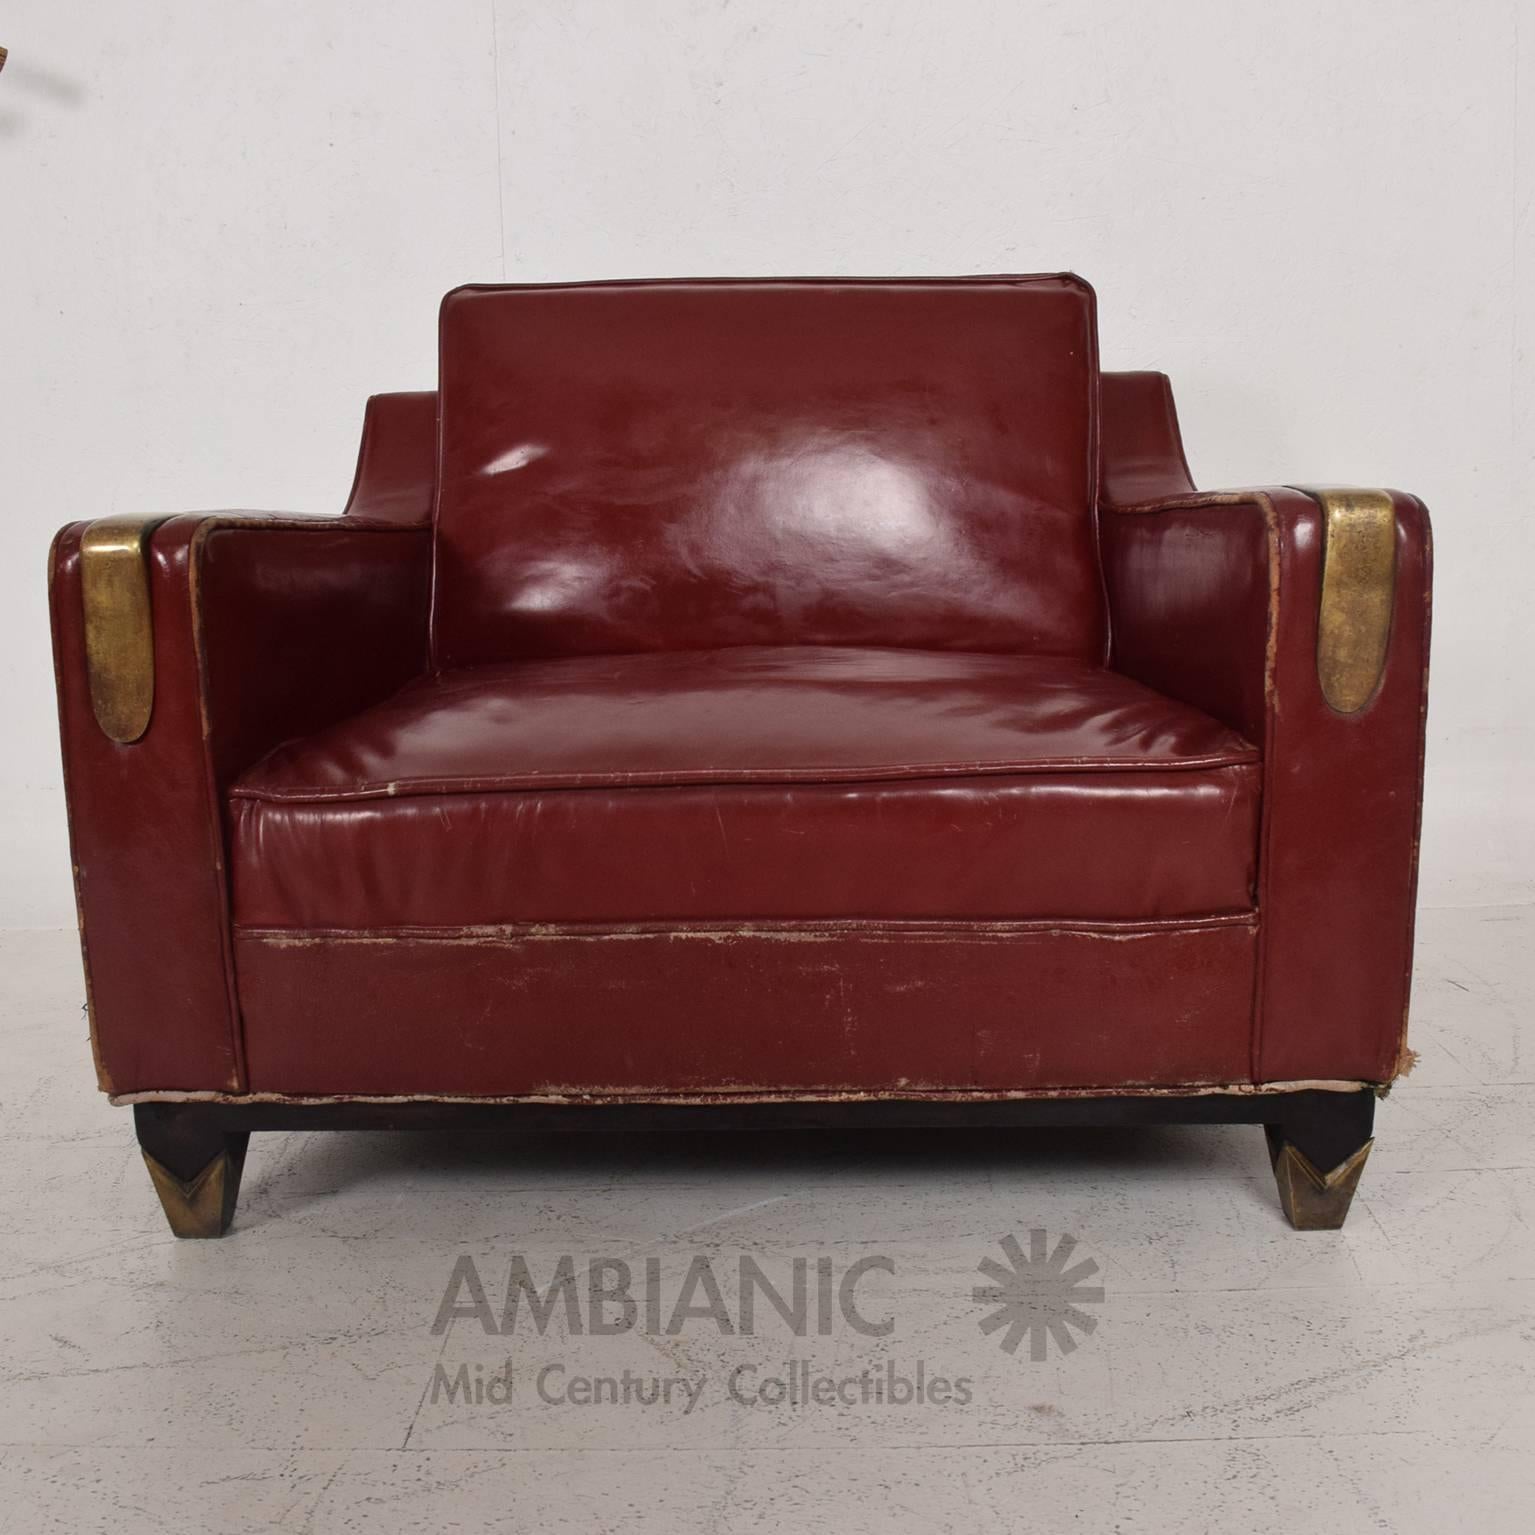 For your consideration, a Mexican modernist club chair and ottoman red leather and brass. Attributed to Arturo Pani, Mexico, circa 1950s.

Original vintage condition. Leather has sings of vintage wear. Brass has patina. Wood has patina and nicks